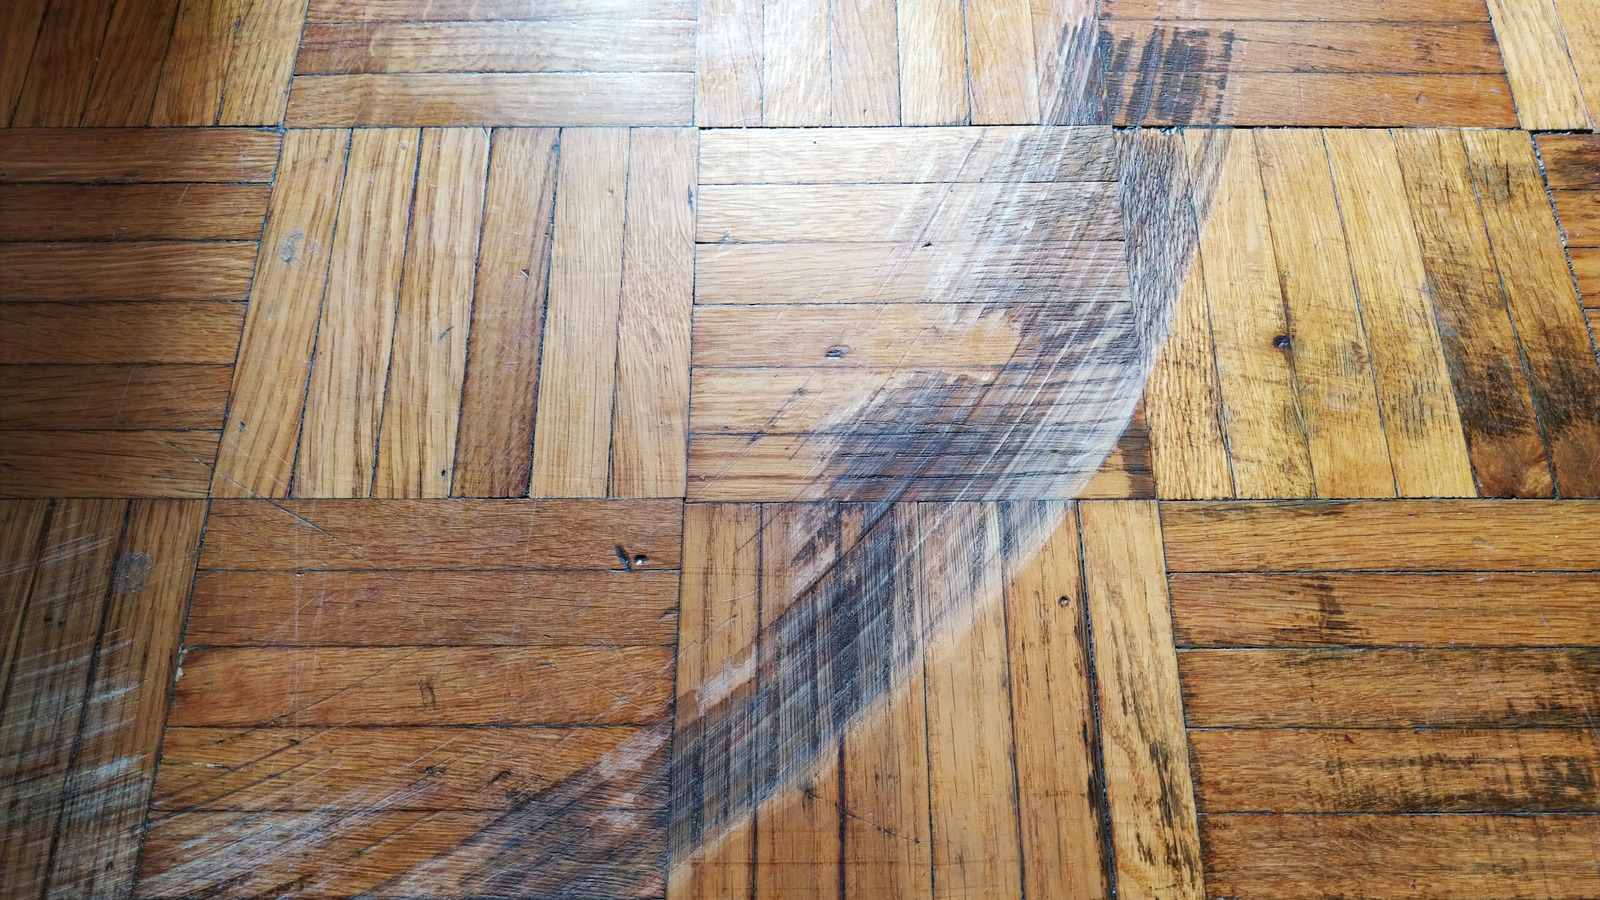 Fix The Huge Scratch In Your Wood Floor, How To Get Rid Of Scratches On Hardwood Floors